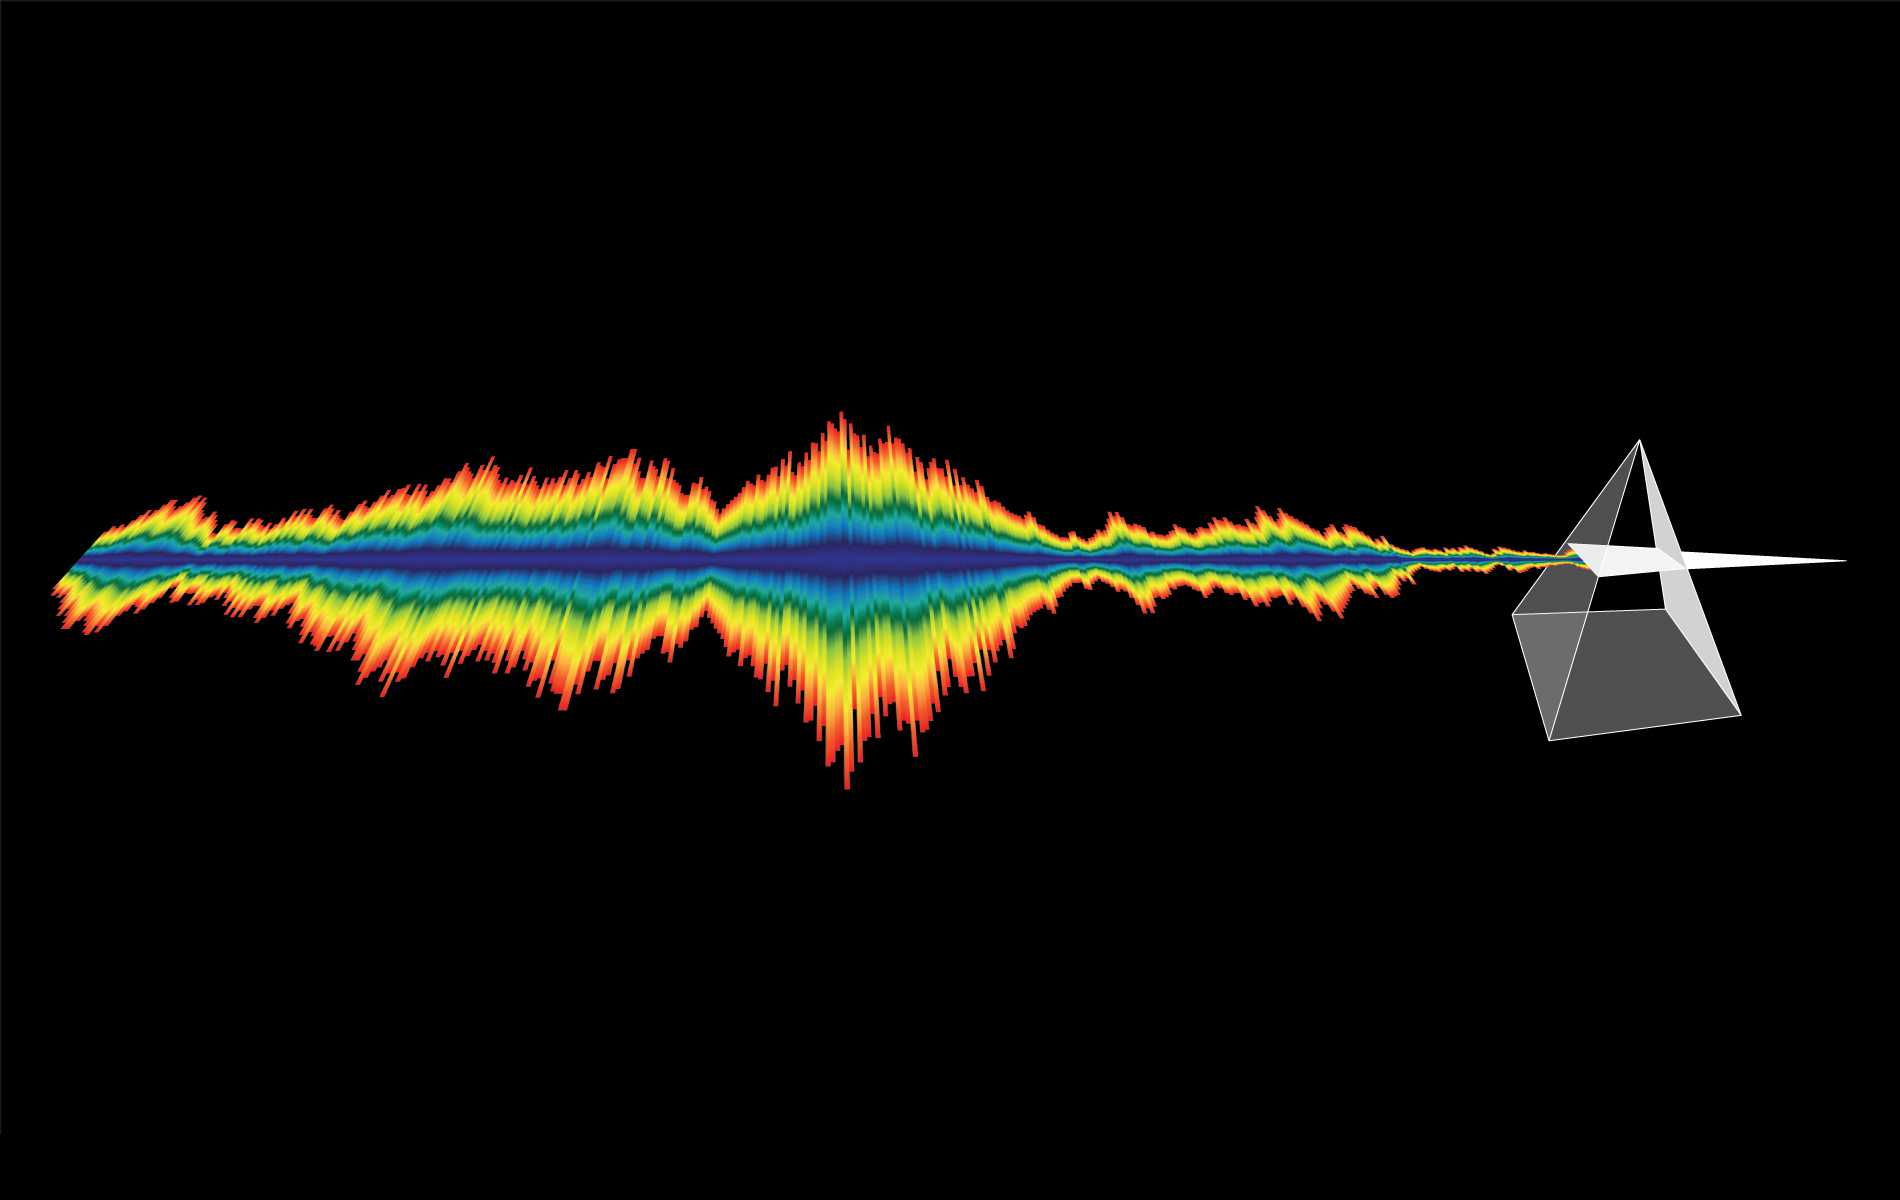 Sound waves from a prism